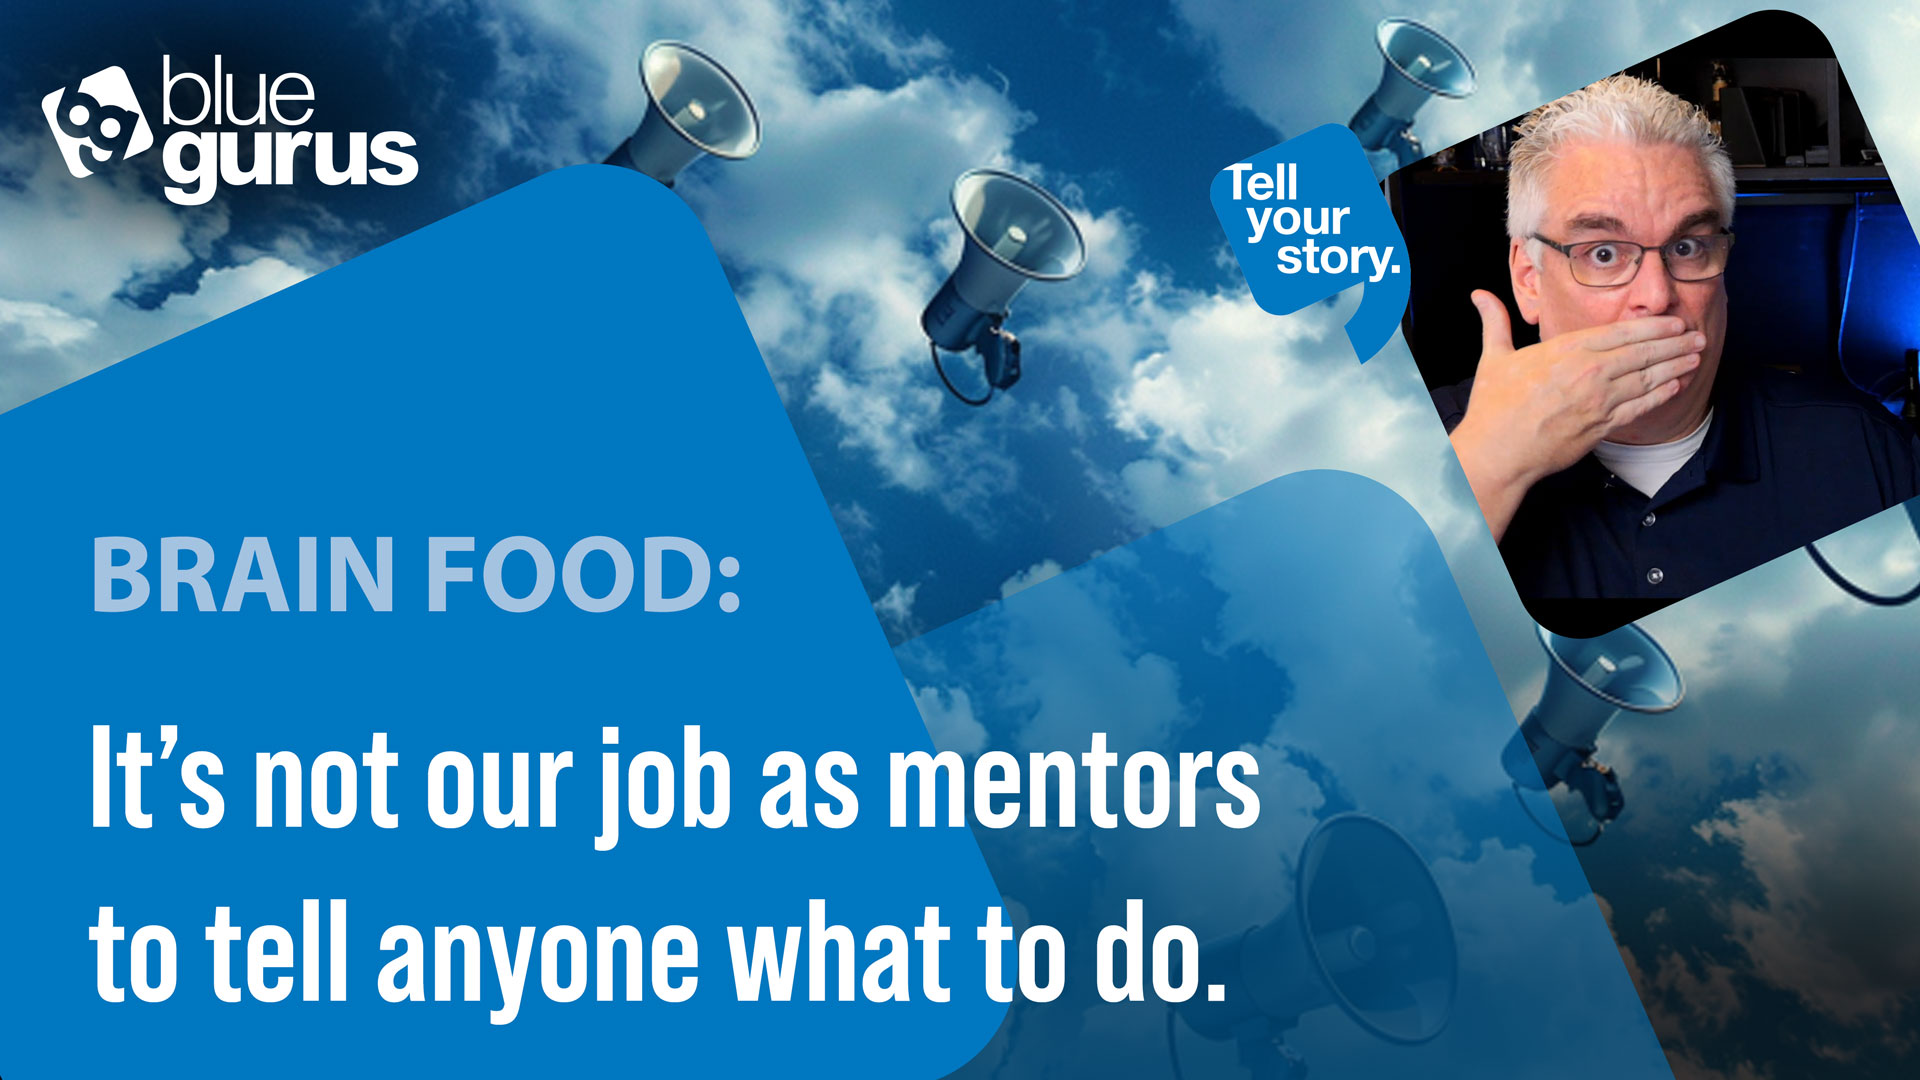 Brain Food: It’s not our job as mentors to tell anyone what to do.